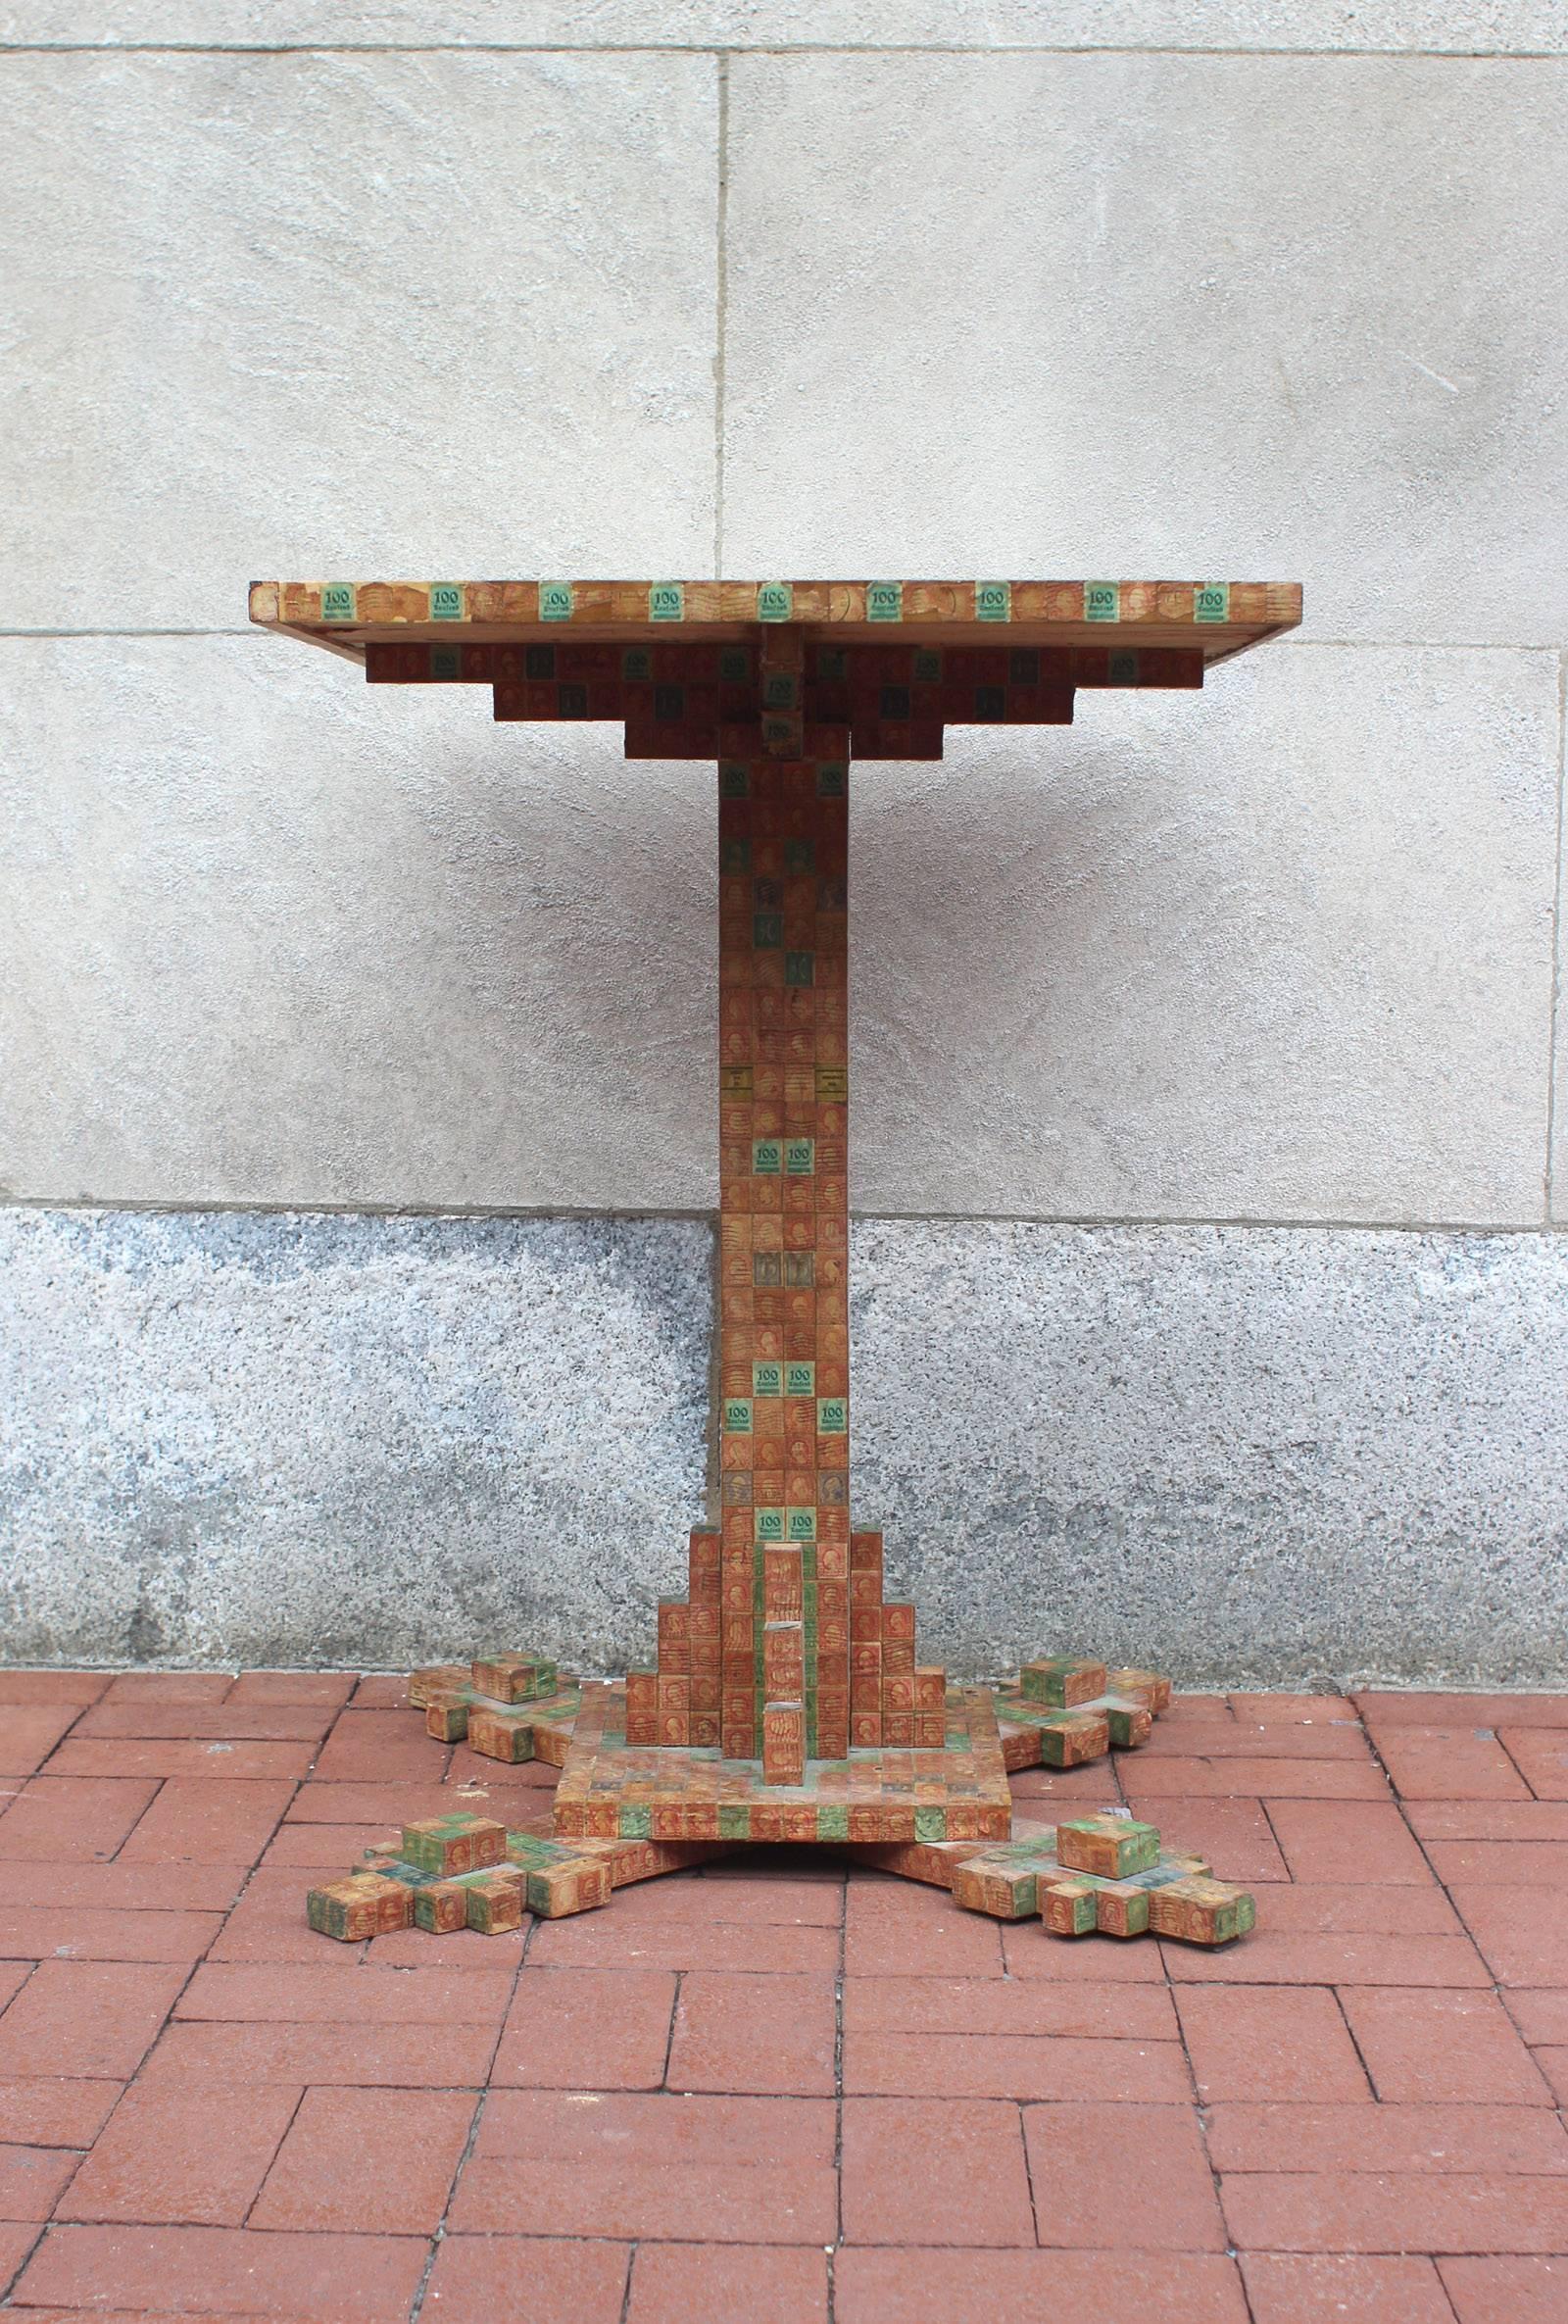 Mid-20th Century Obsessively Stamp-Decorated Folk Art Table, American Modernist For Sale